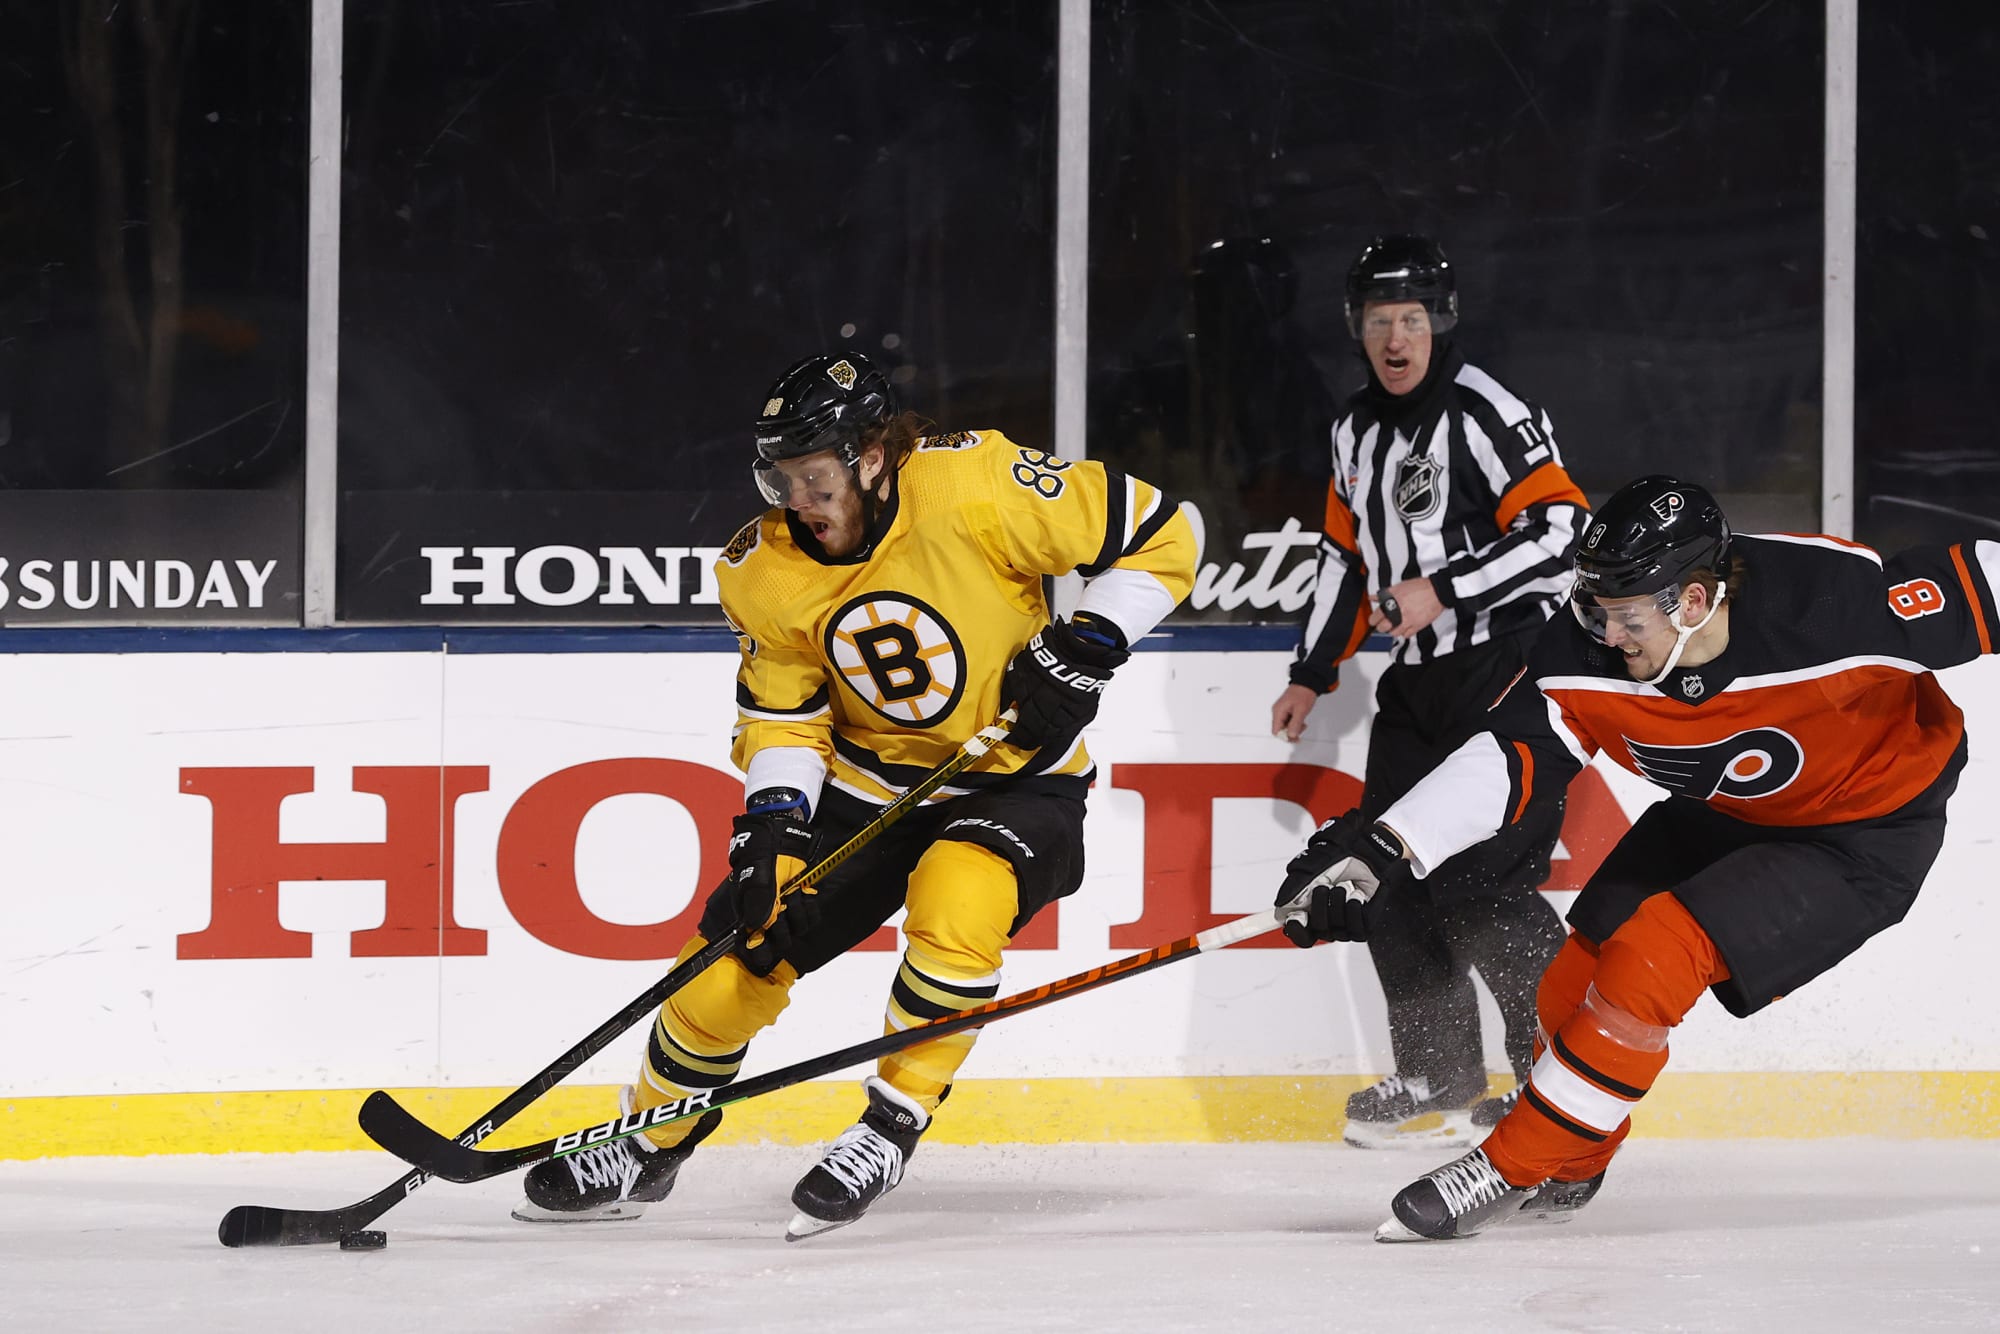 Lake Tahoe's Elements Couldn't Cool Off Pastrnak Or Stop Bruins' Resilience  - Full Press Hockey